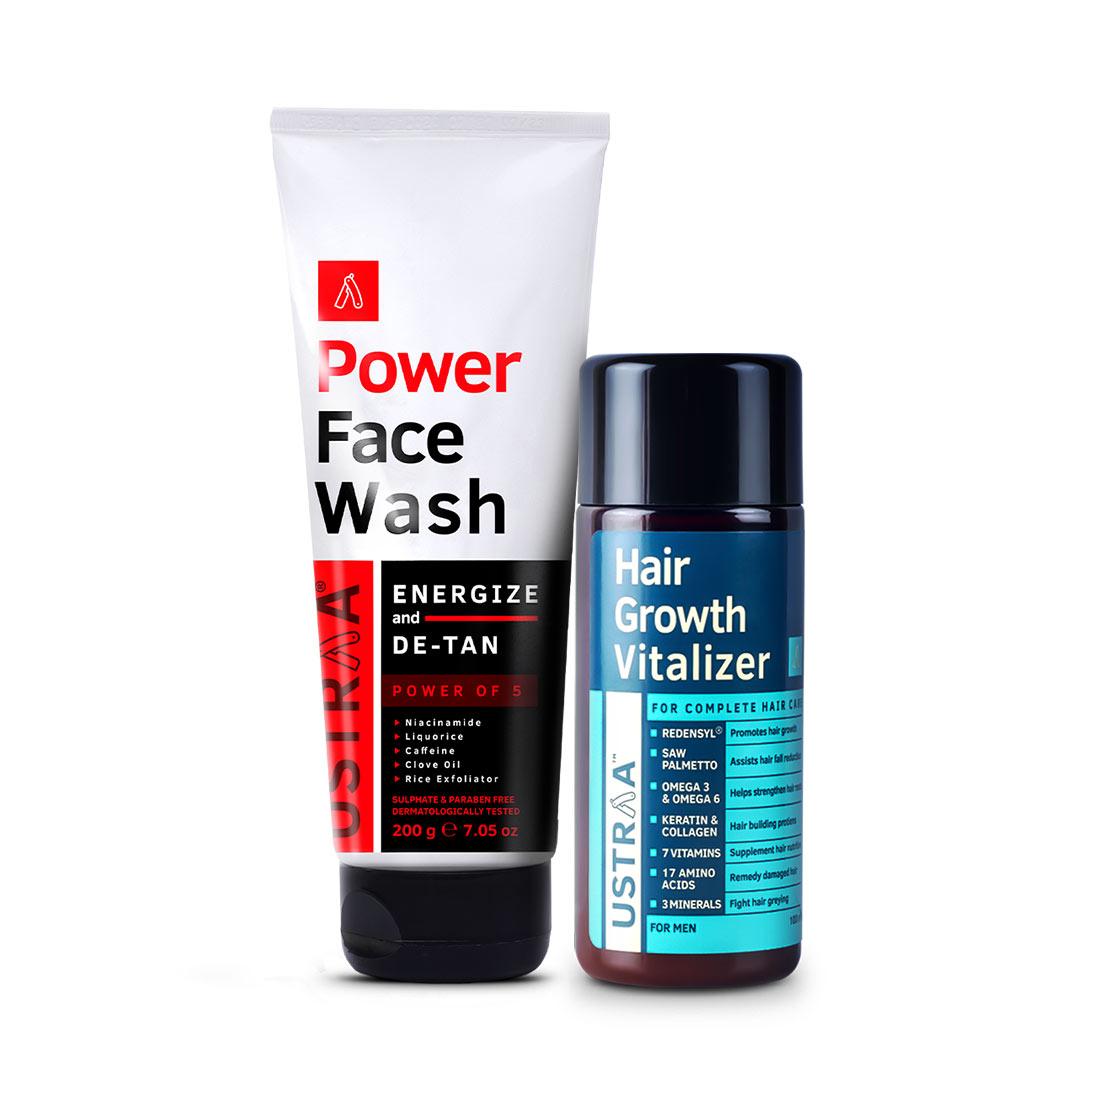 Power Face Wash Energize & Hair Growth Vitalizer